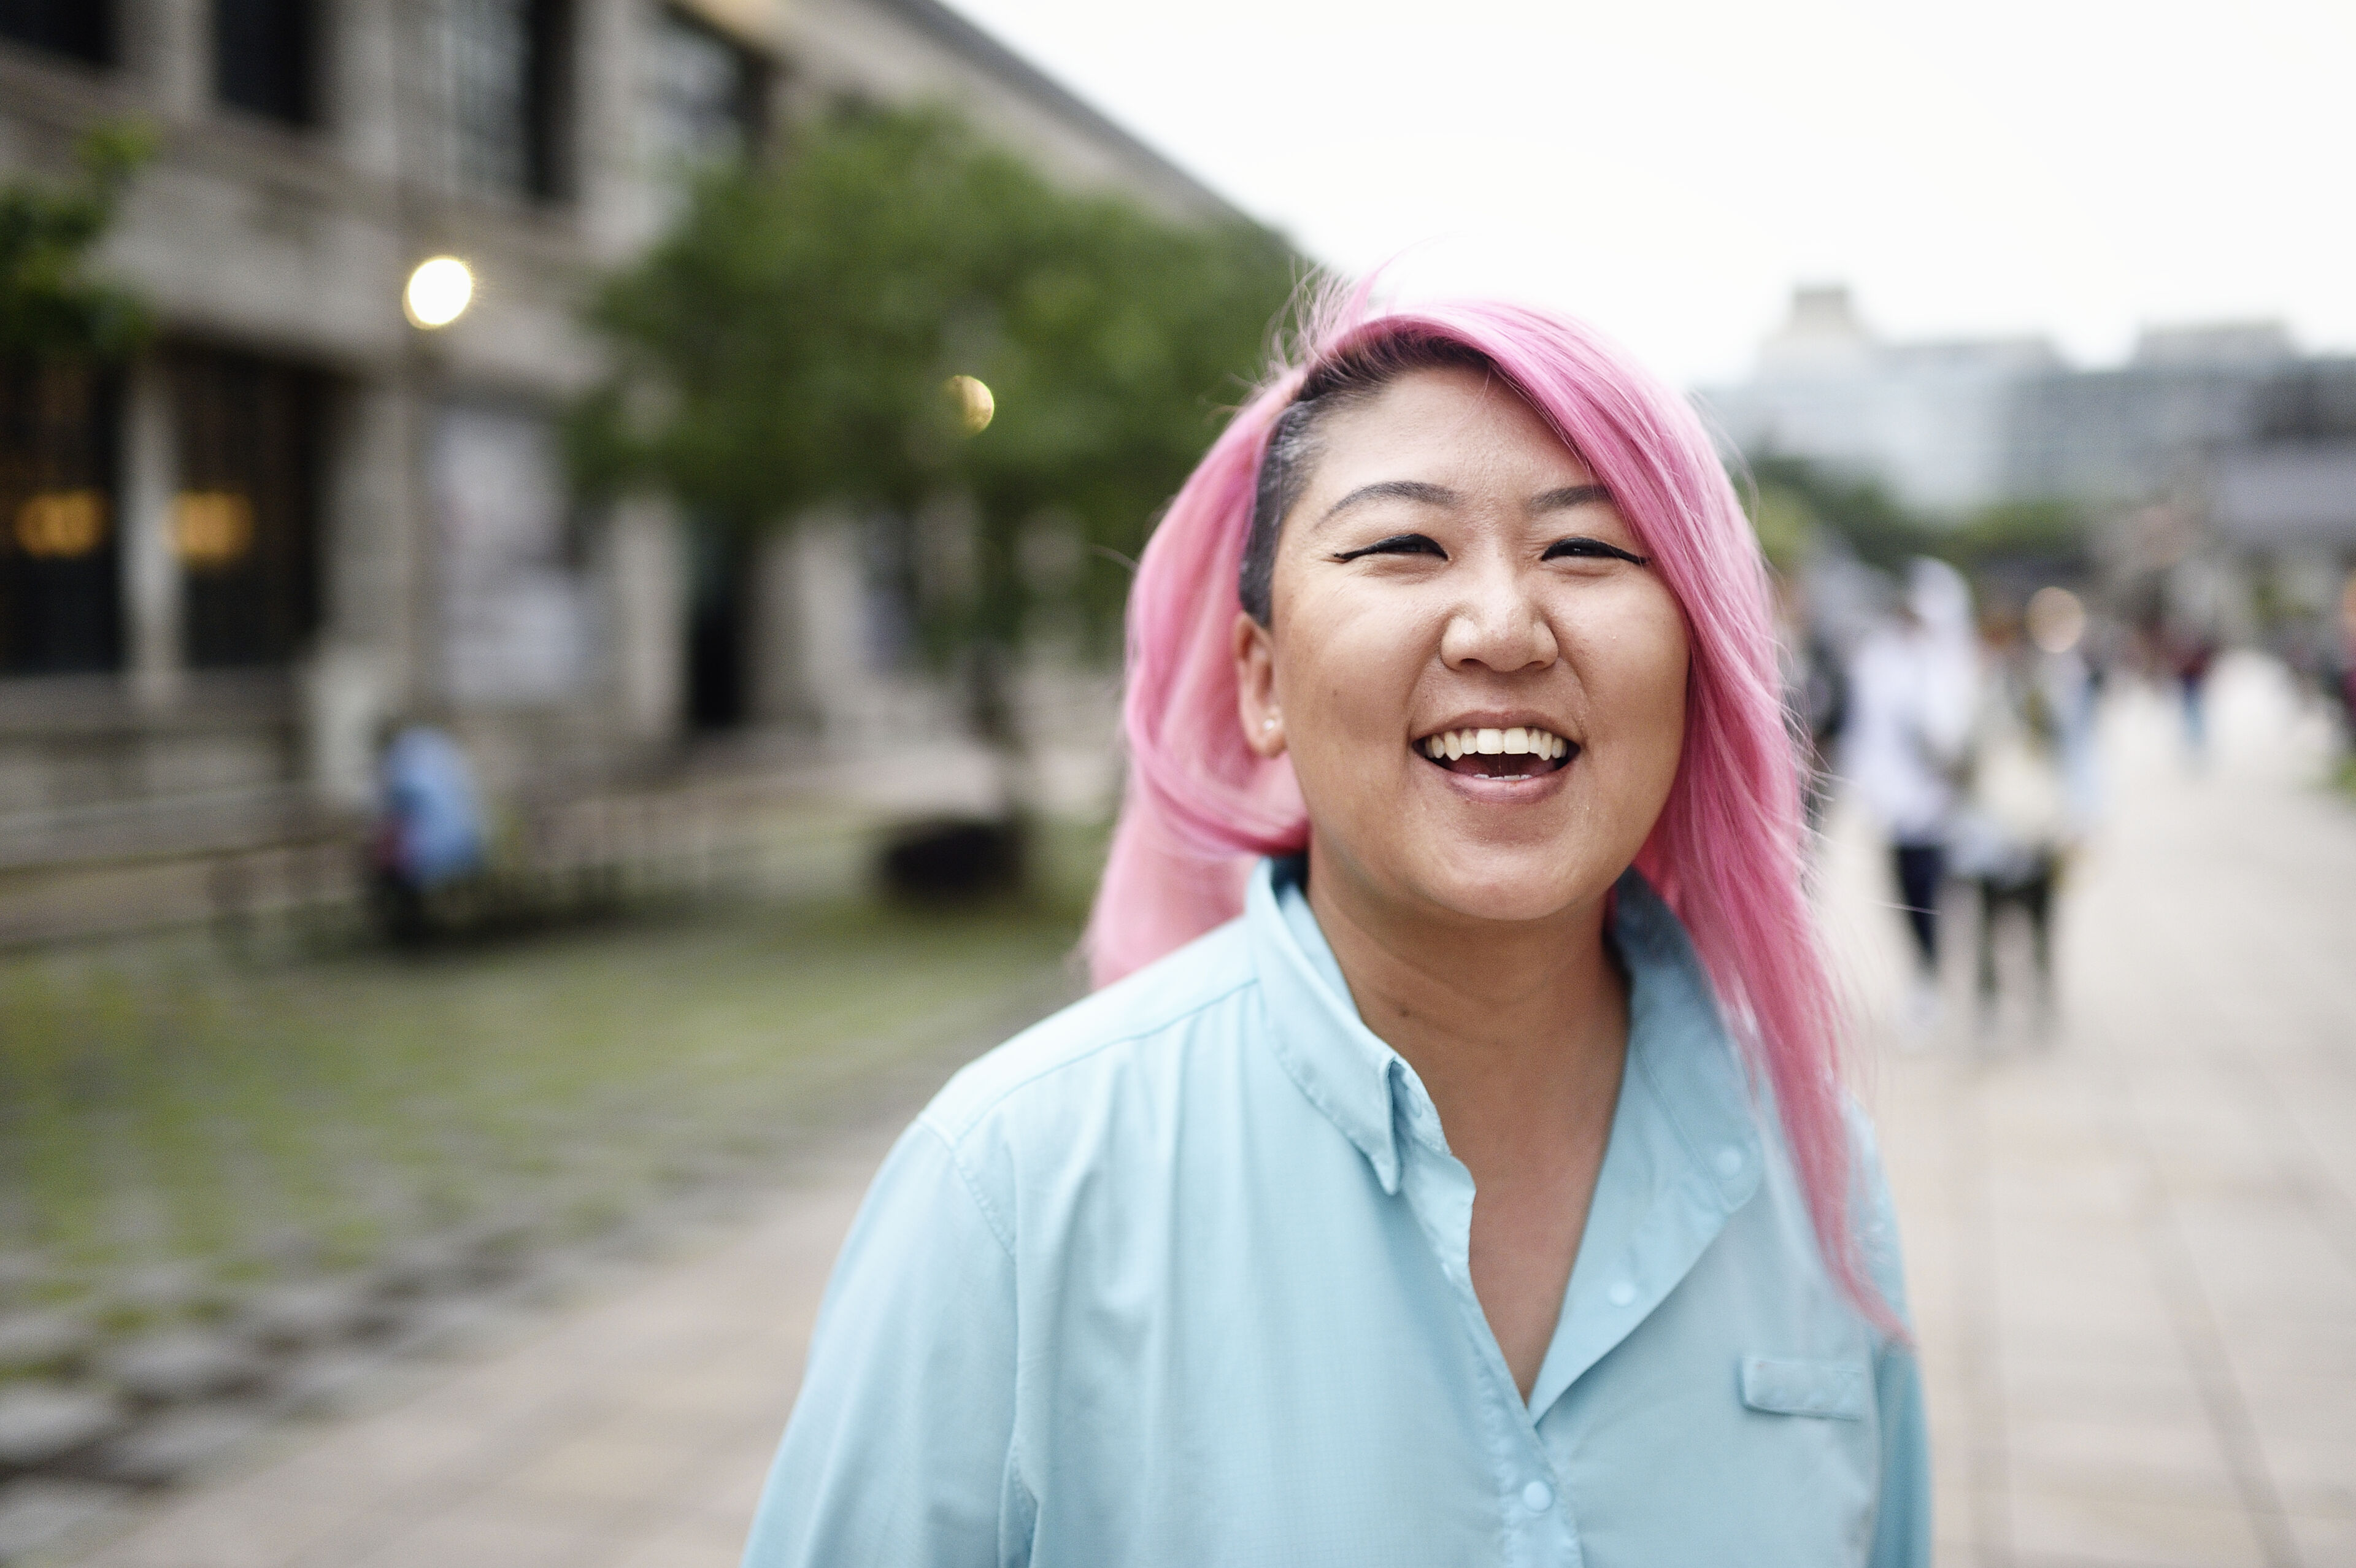 Portrait of a woman with long pink hair on a campus